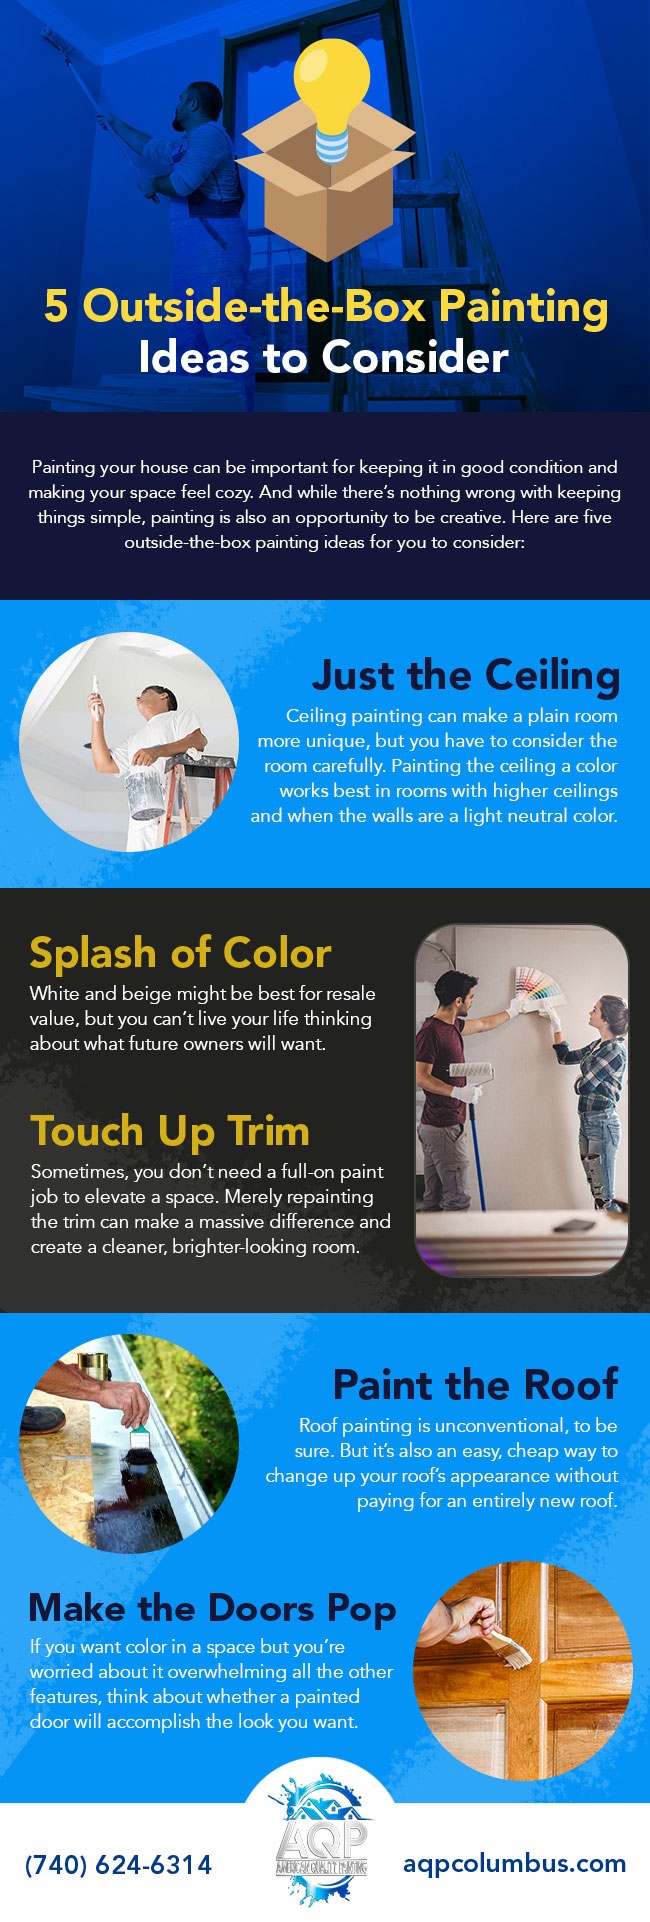 5 Outside-the-Box Painting Ideas to Consider